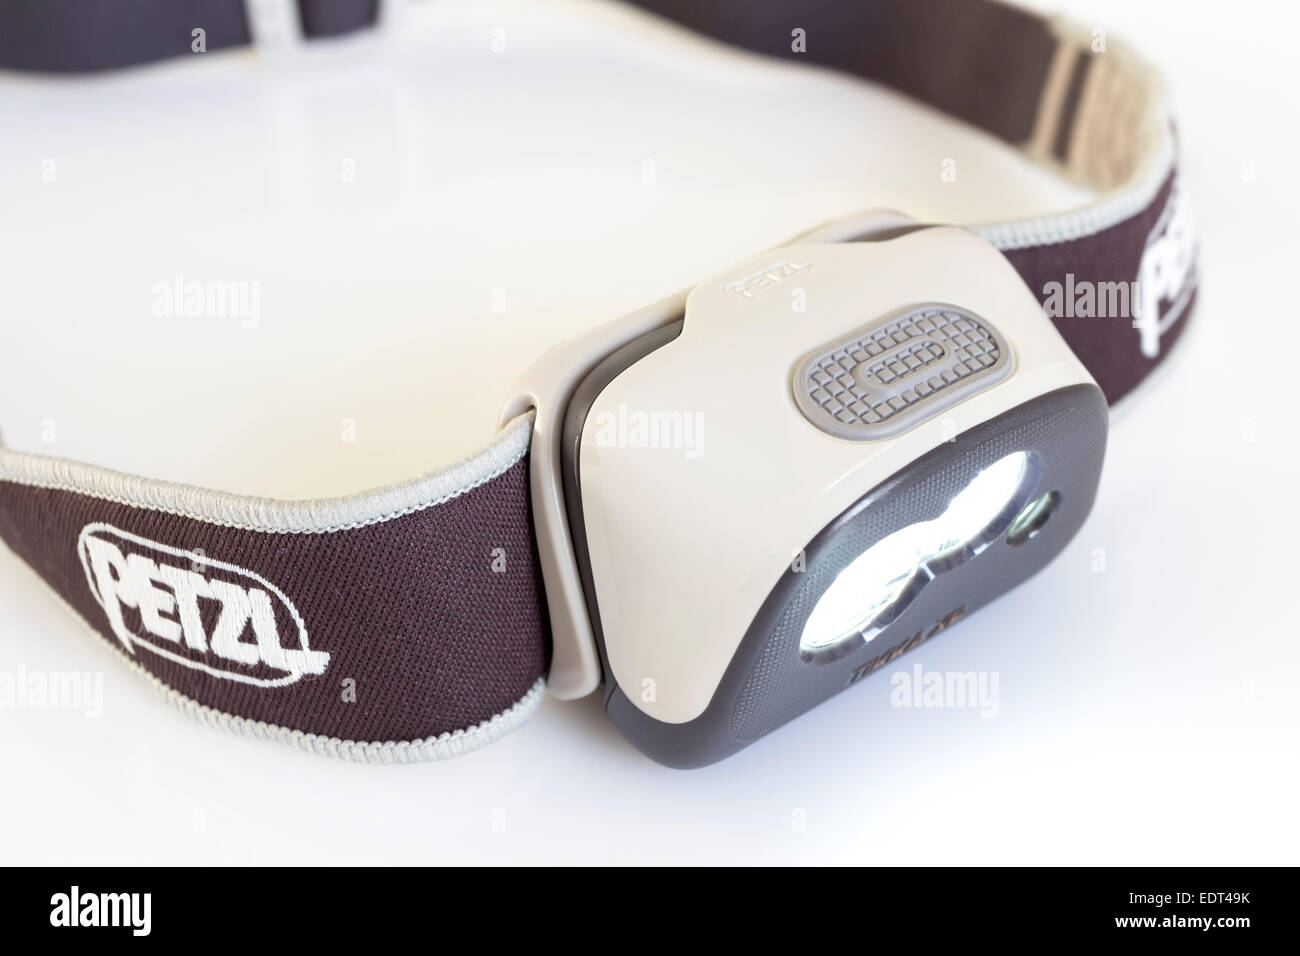 maternal Need Visiting grandparents A Petzl Tikka XP LED Head Torch on a White Background Stock Photo - Alamy